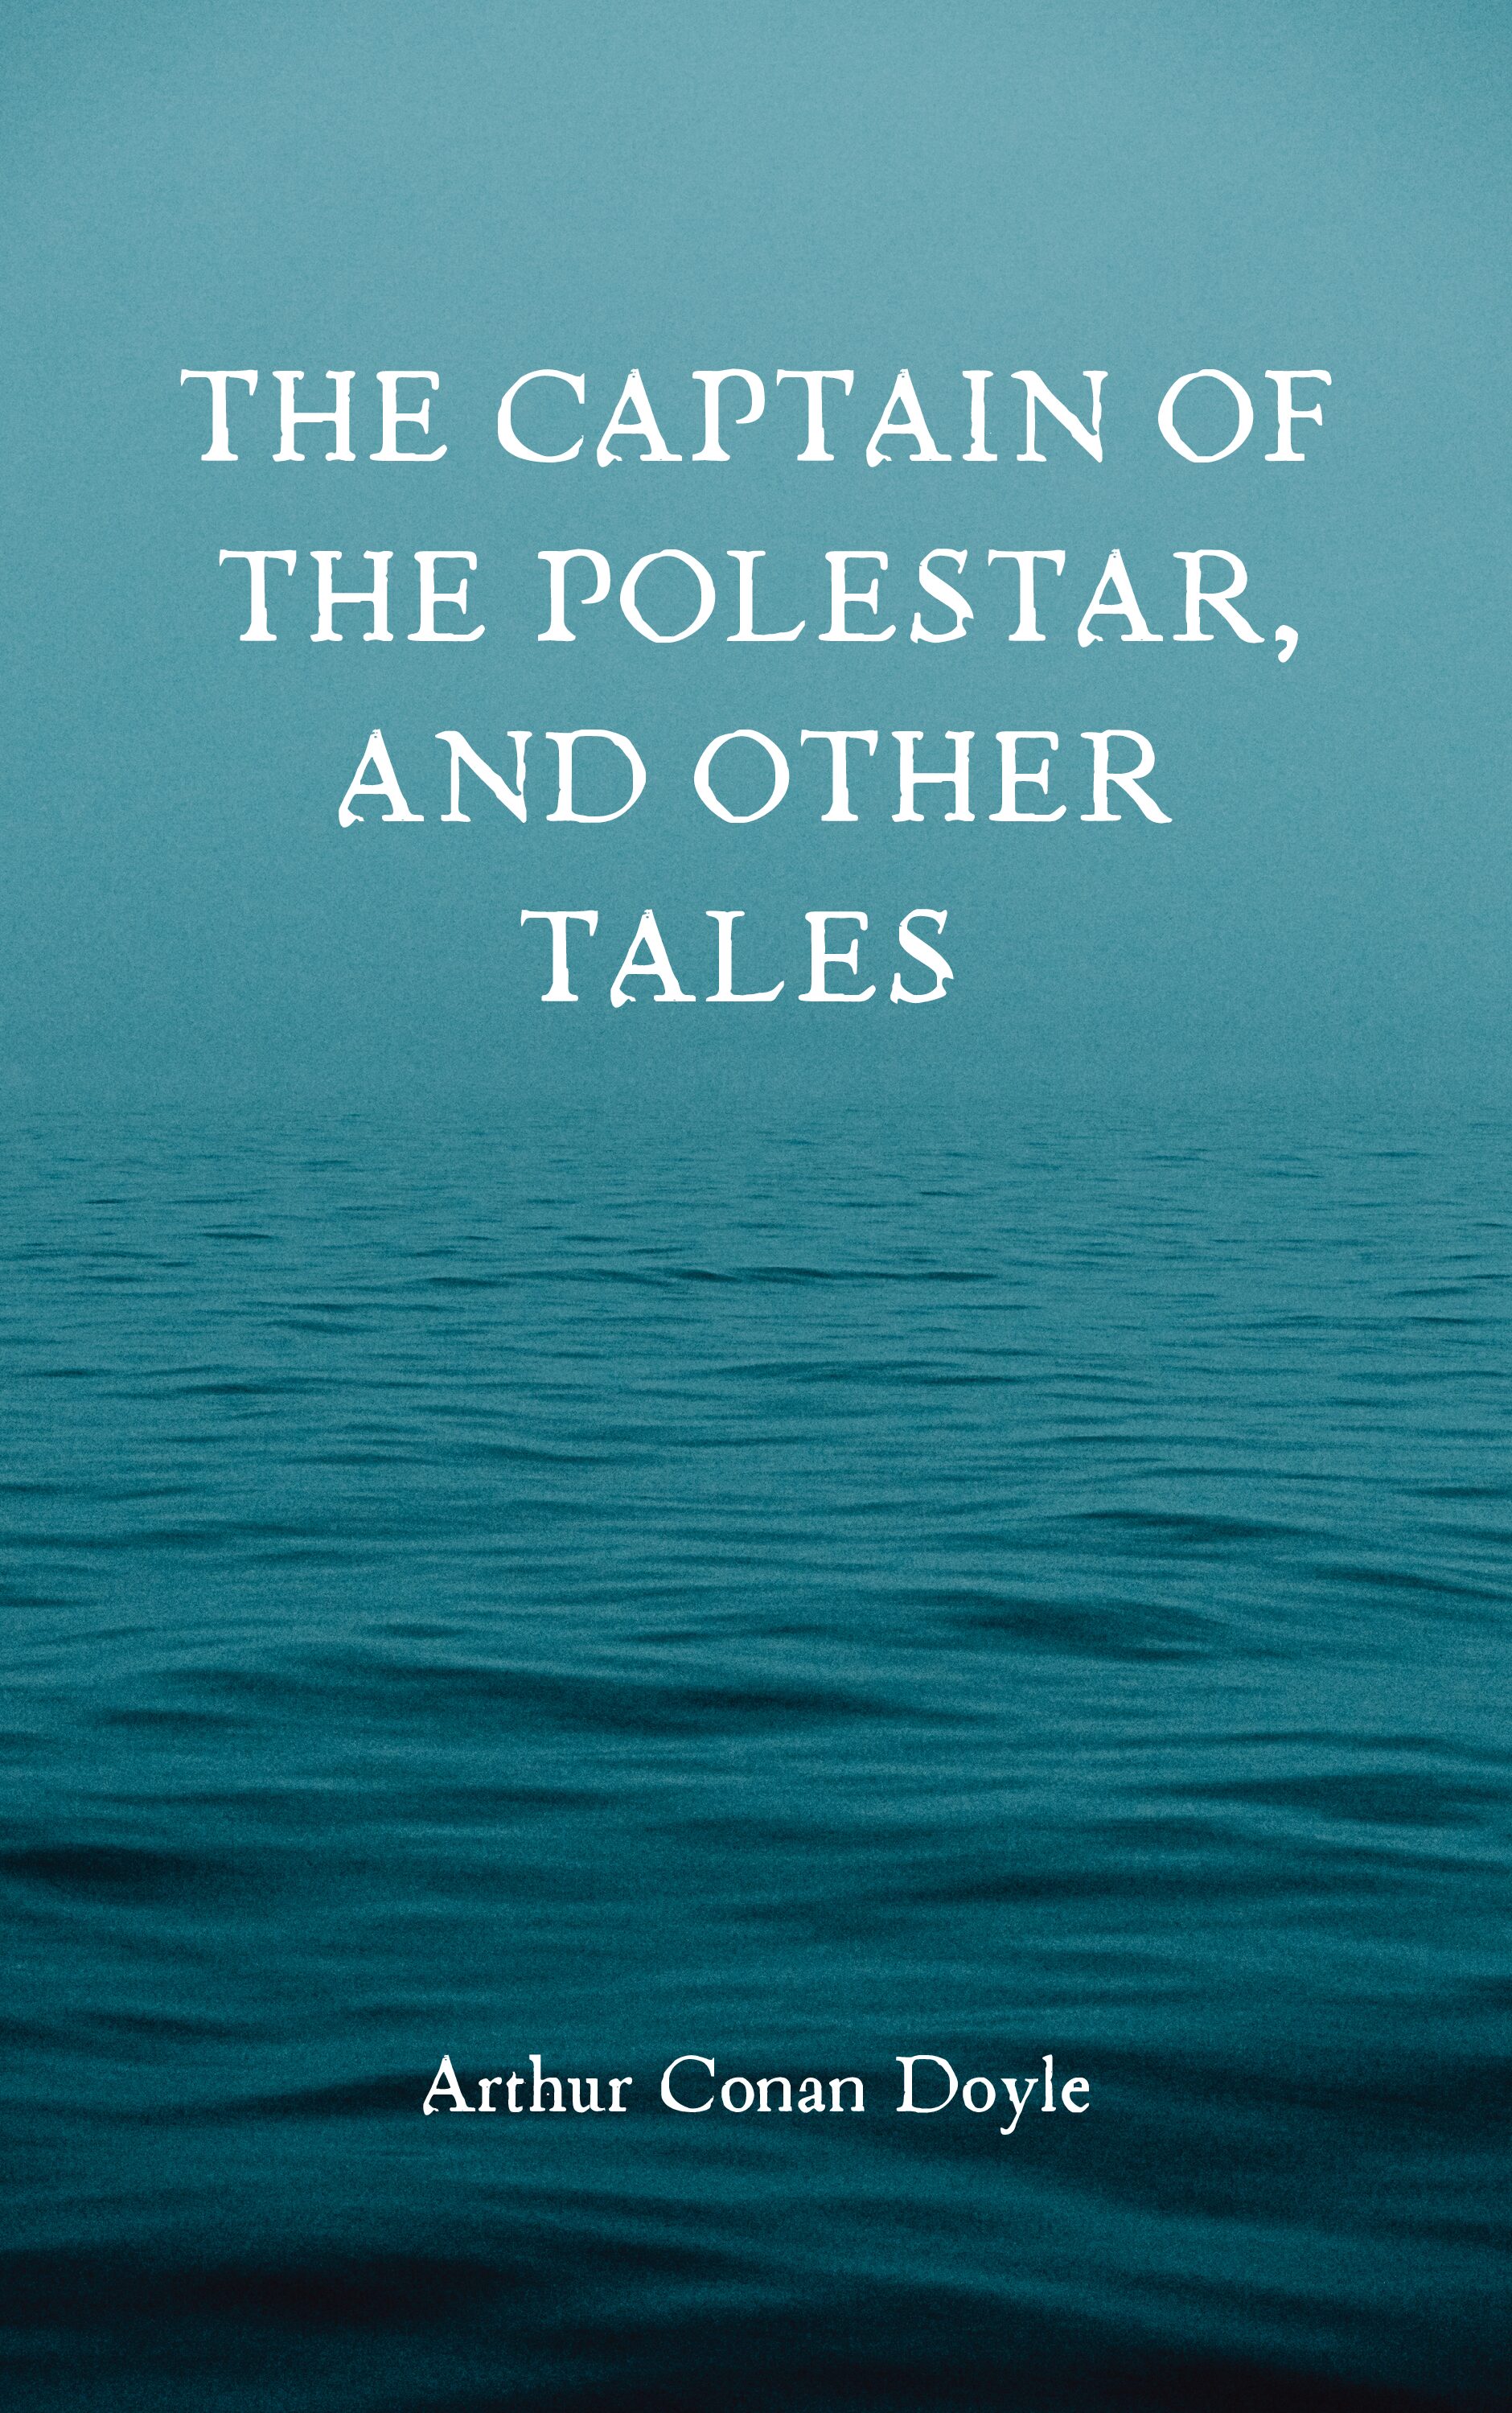 Book Cover: The Captain of the Polestar, and Other Tales